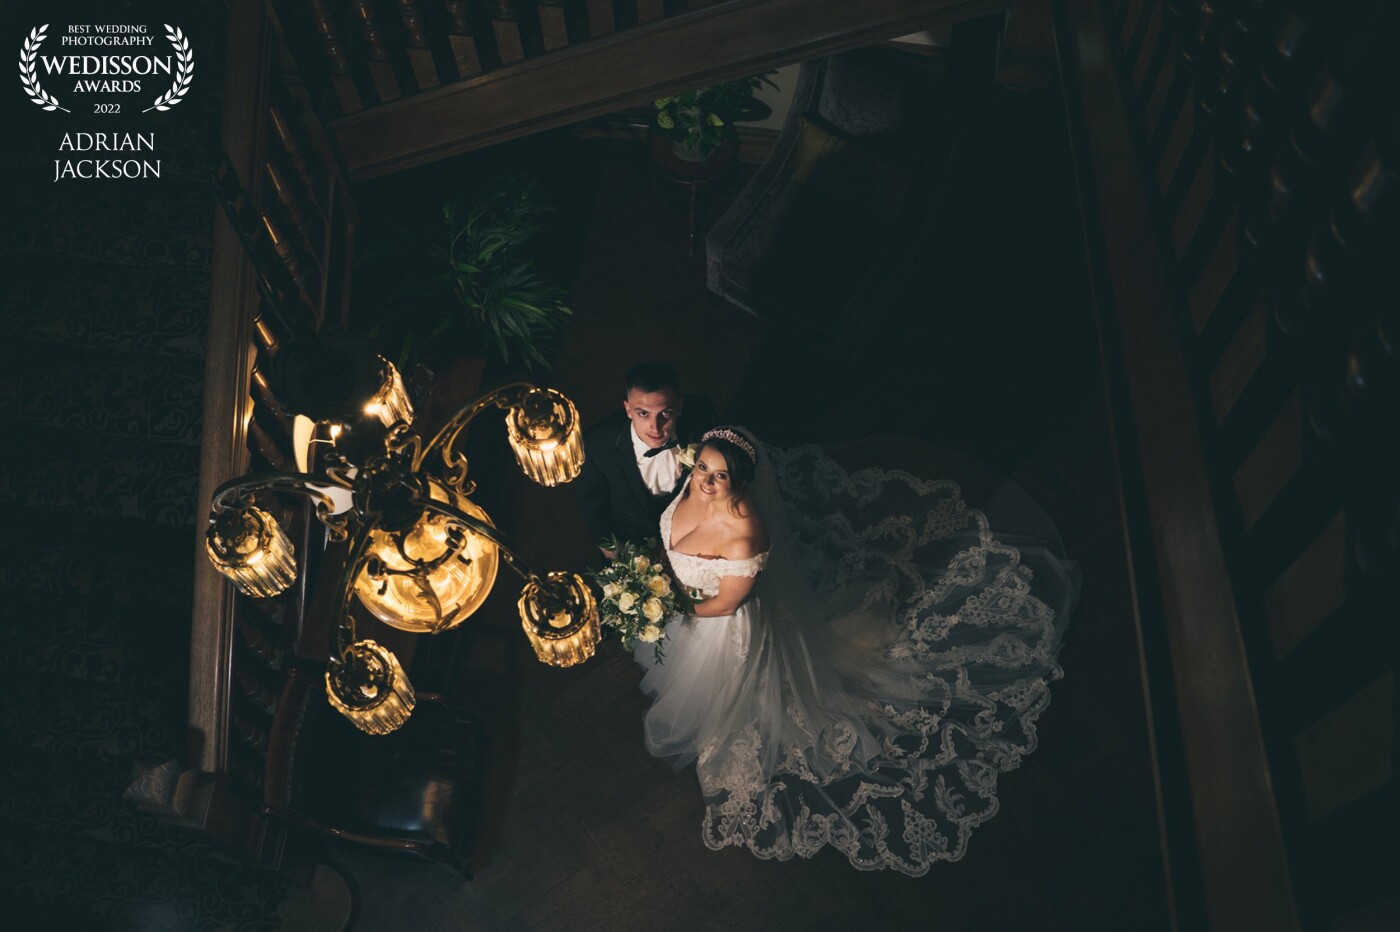 Taken at the beautiful Crathorne Hall Hotel. A late autumn wedding meant minimal daylight for outside portraits. This staircase and chandelier provided the perfect opportunity to expose for the highlights and  add a soft box on Katie and Chris.